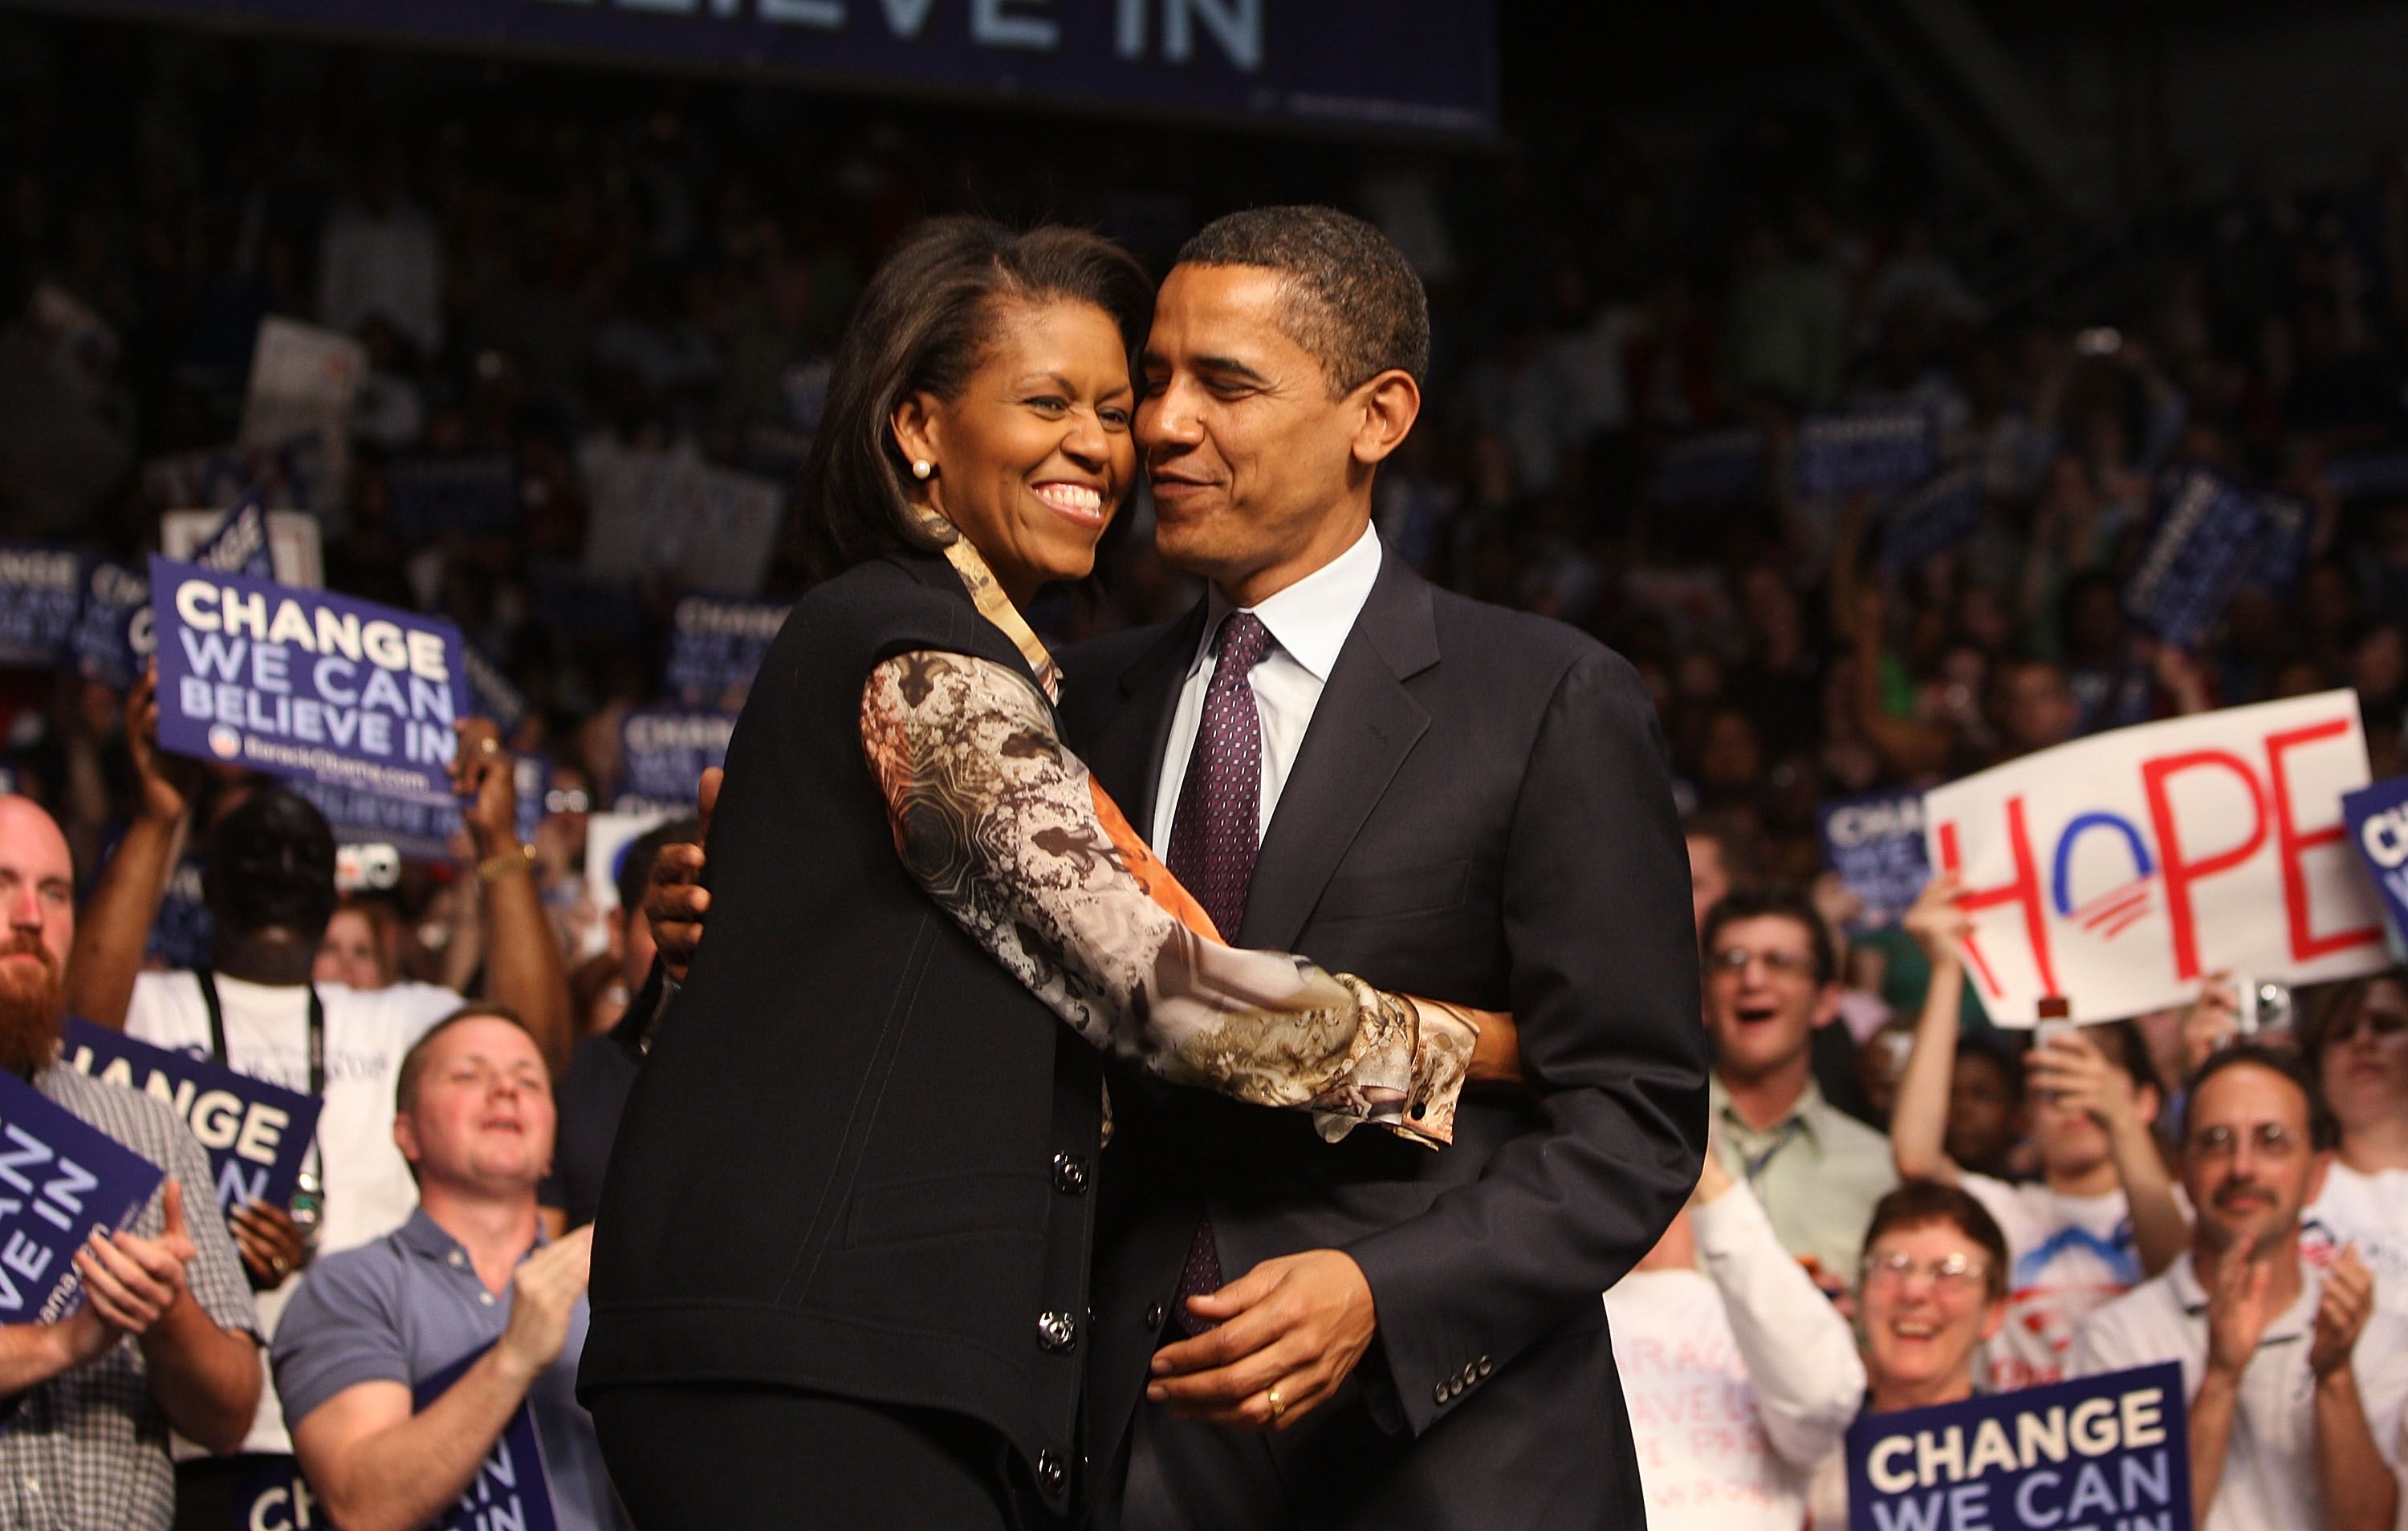 Barack Obama and Michelle Obama embrace each other at a rally April 22, 2008 in Evansville, Indiana. | Source: Getty Images